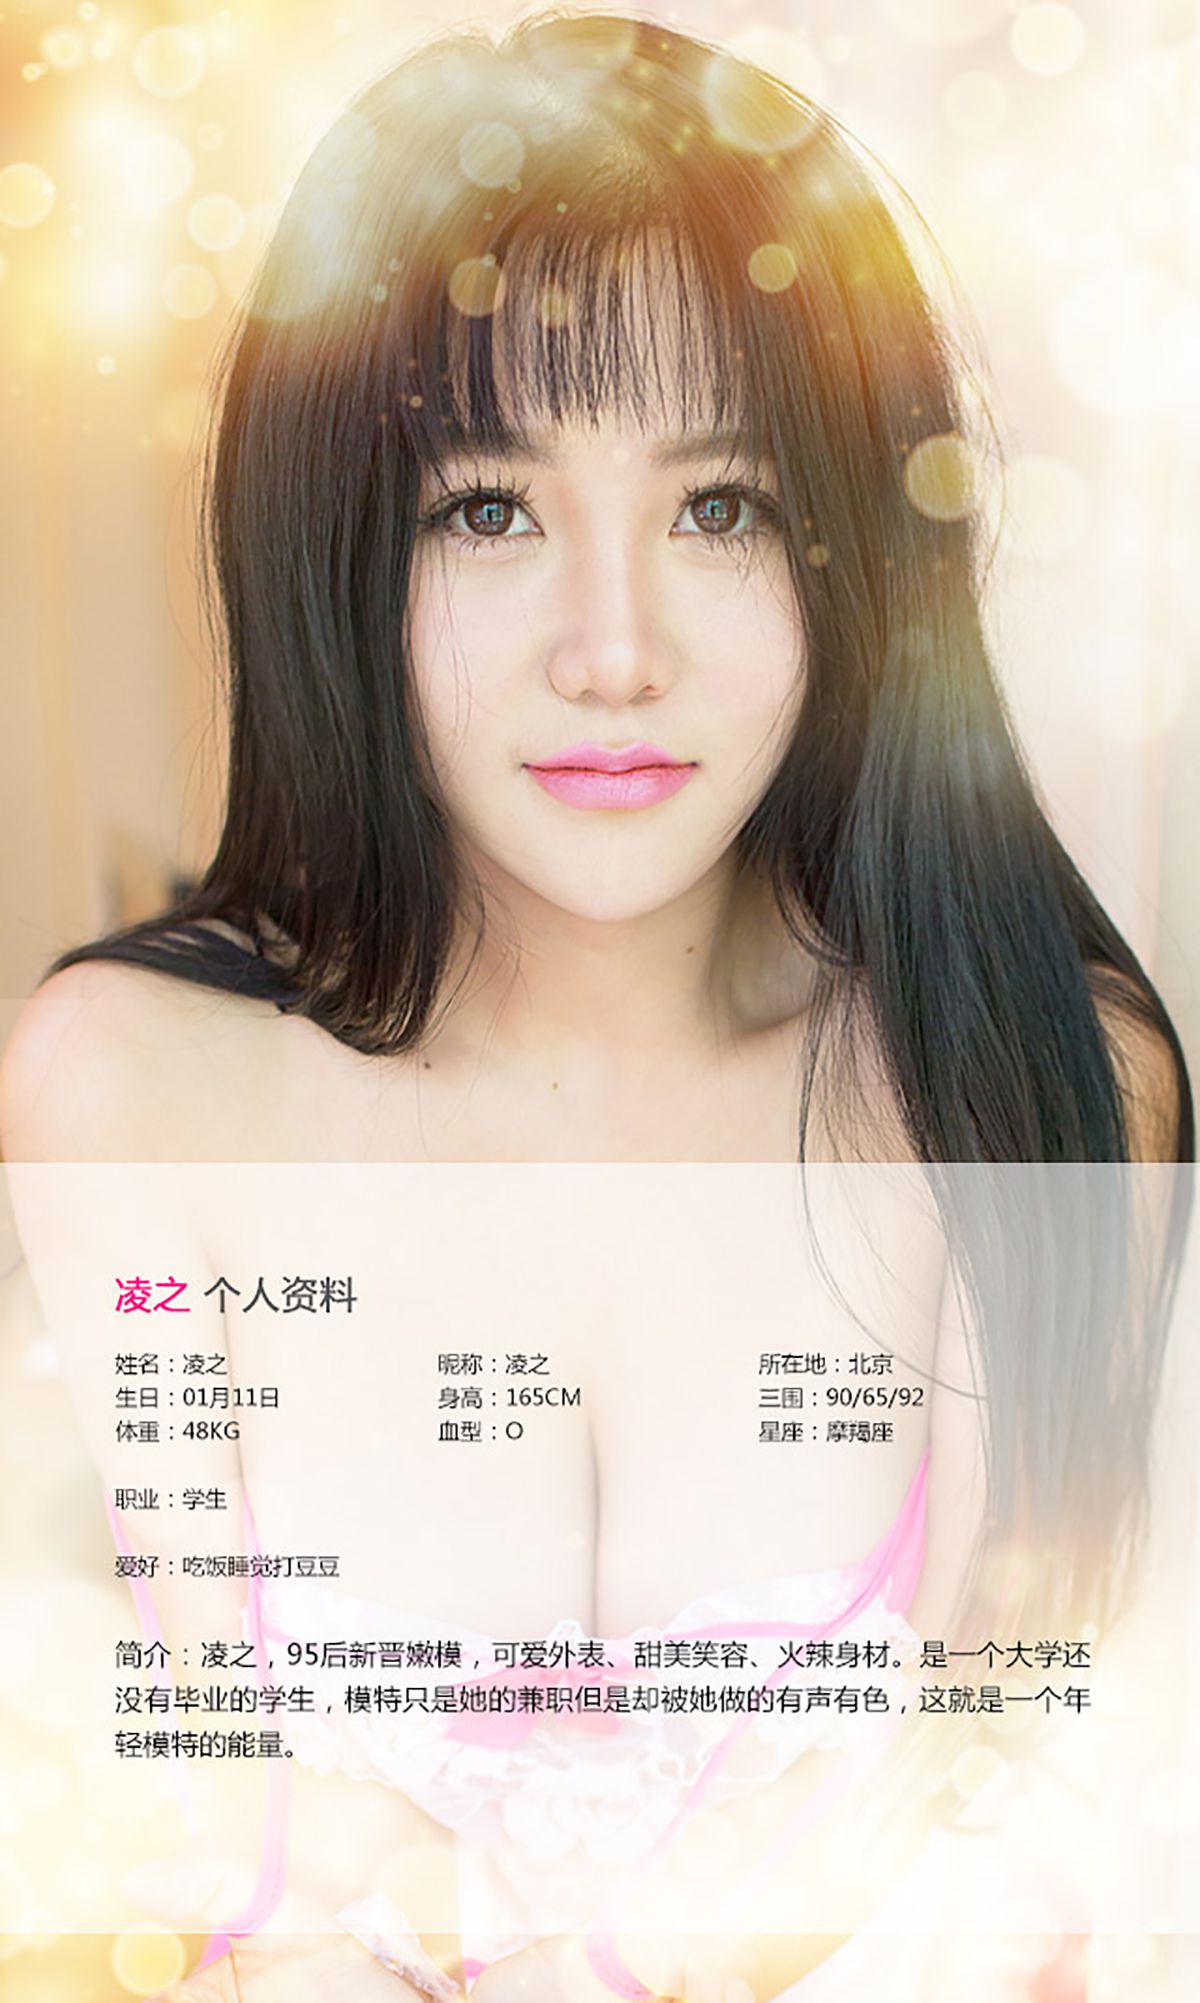 Ling Zhi’s “Leading the Family Has a Girl Begins to Grow” [爱尤物Ugirls] No.140 Photo Album